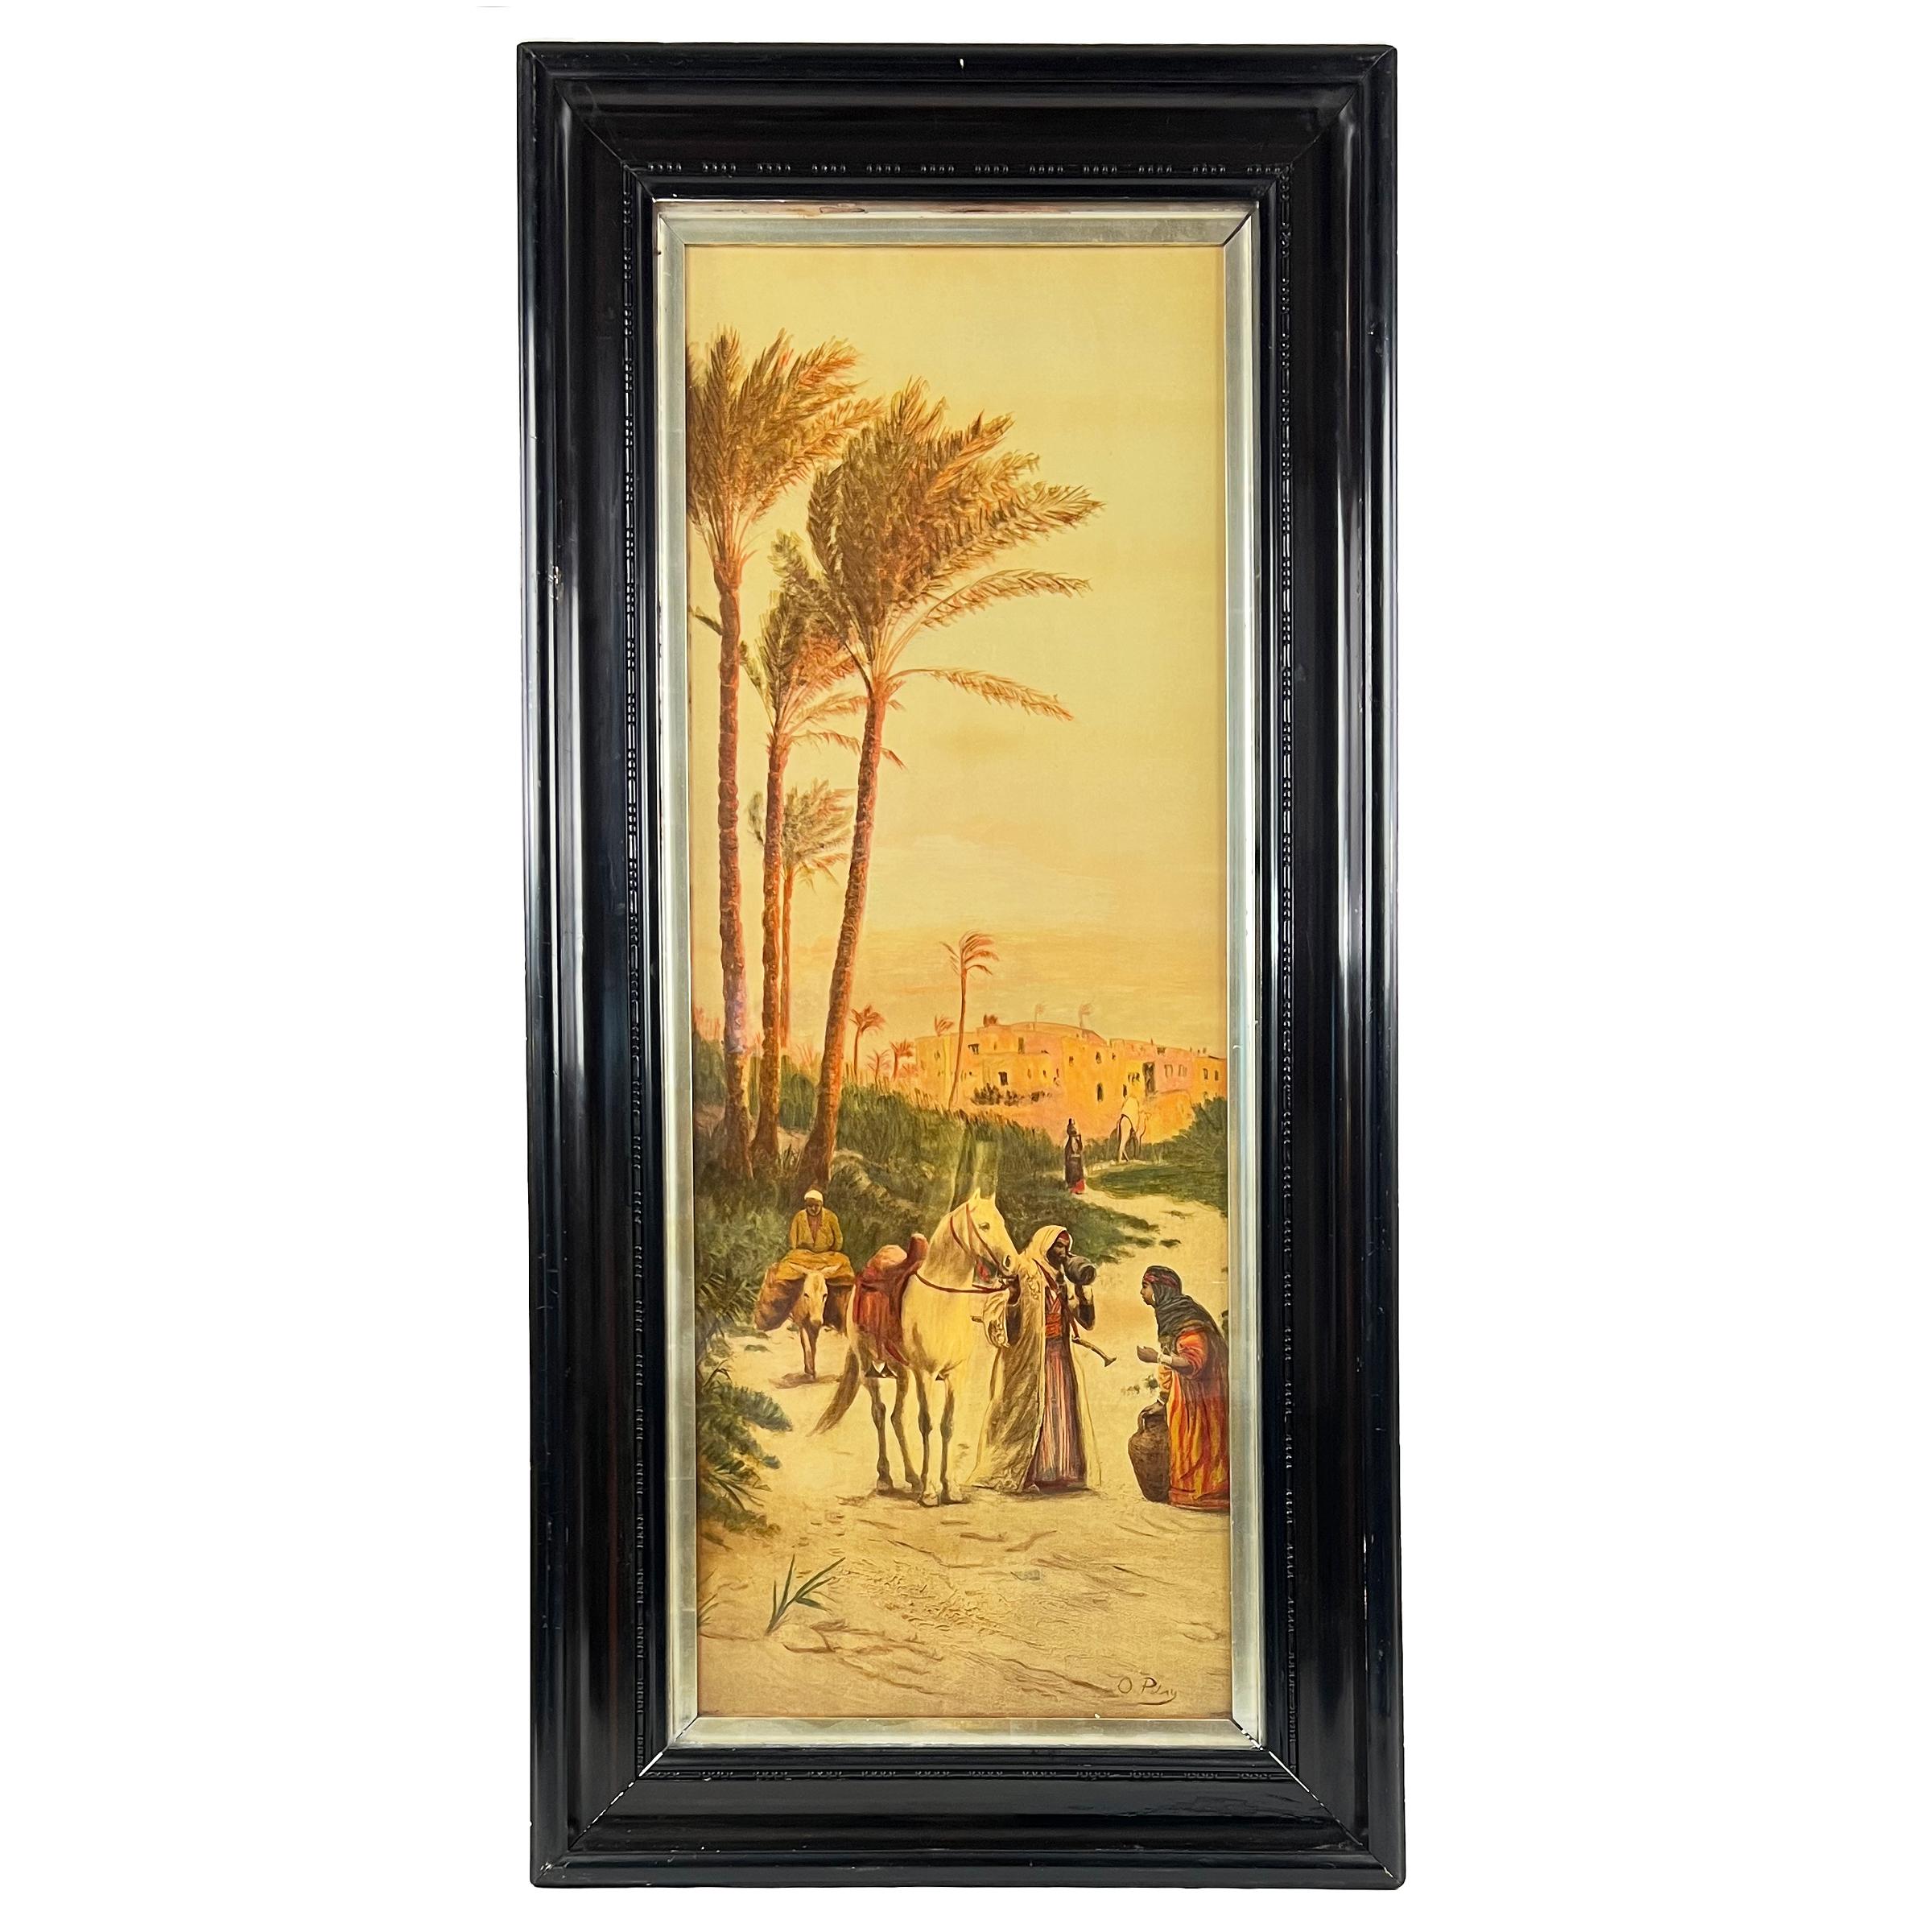 A fine four large prints, first two depicts street scenes in Cairo and the other two depicts desert scenes, signed lower right. 

Otto Pilny (1866 – 1936) was a Swiss painter who specialised in Orientalist genre scenes.

Dimensions: H: 122cm, W: